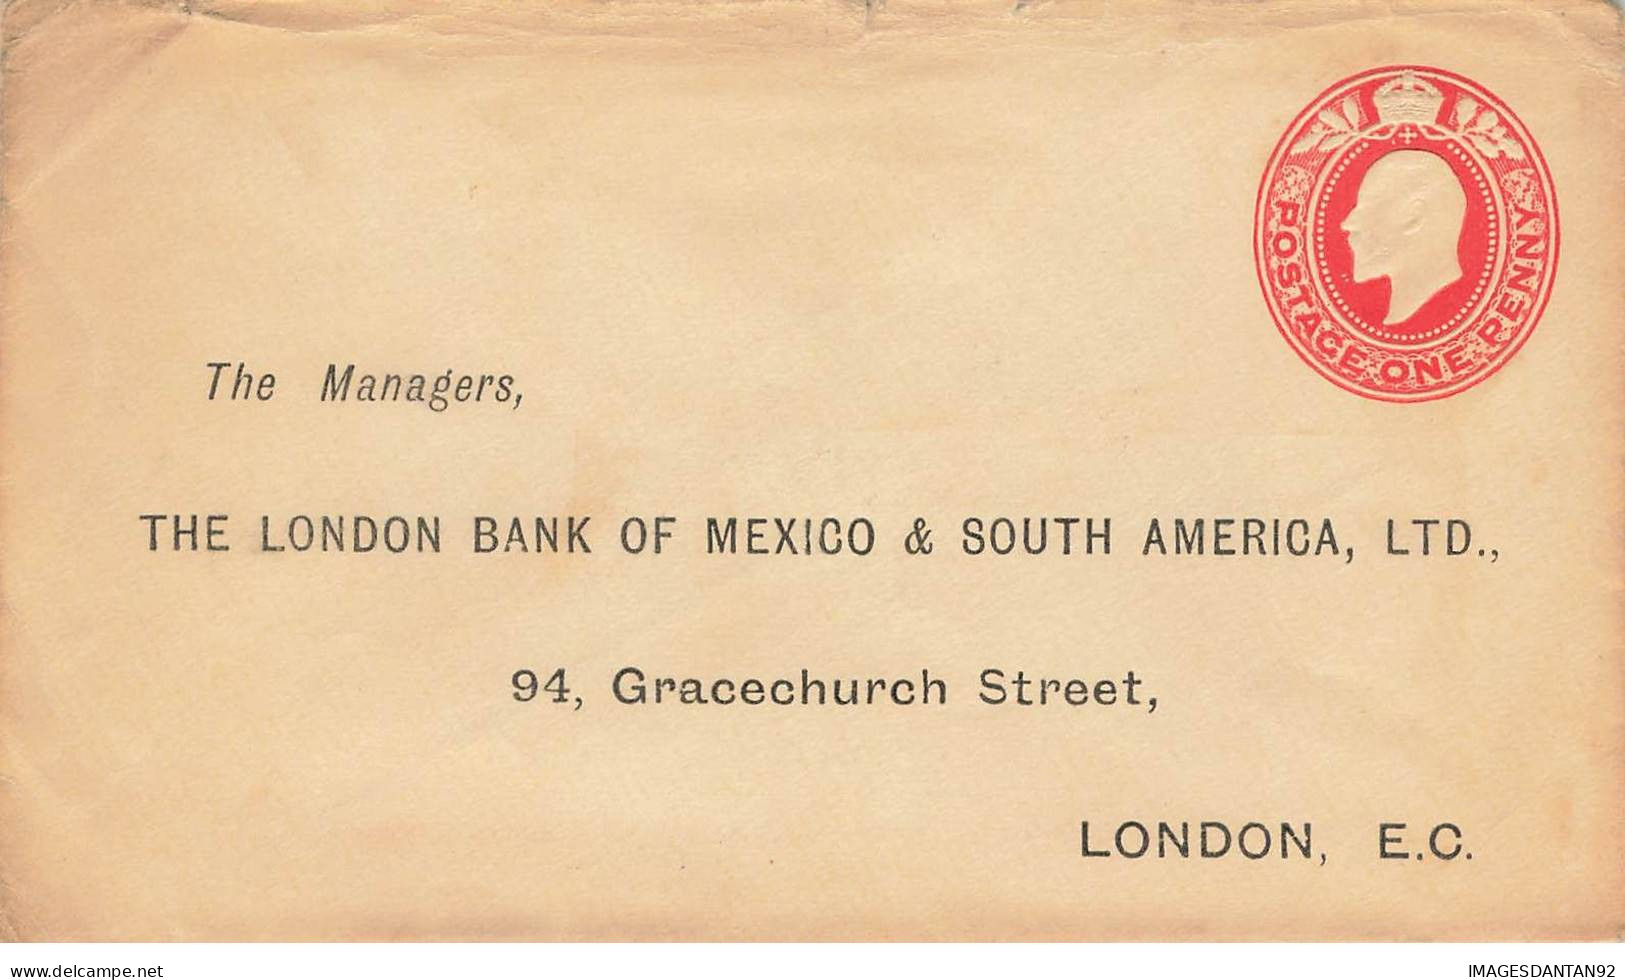 ROYAUME UNI ENGLAND #32806 ENTIER REPIQUAGE THE LONDON BANK OF MEXICO AND SOUTH AMERICA - Stamped Stationery, Airletters & Aerogrammes